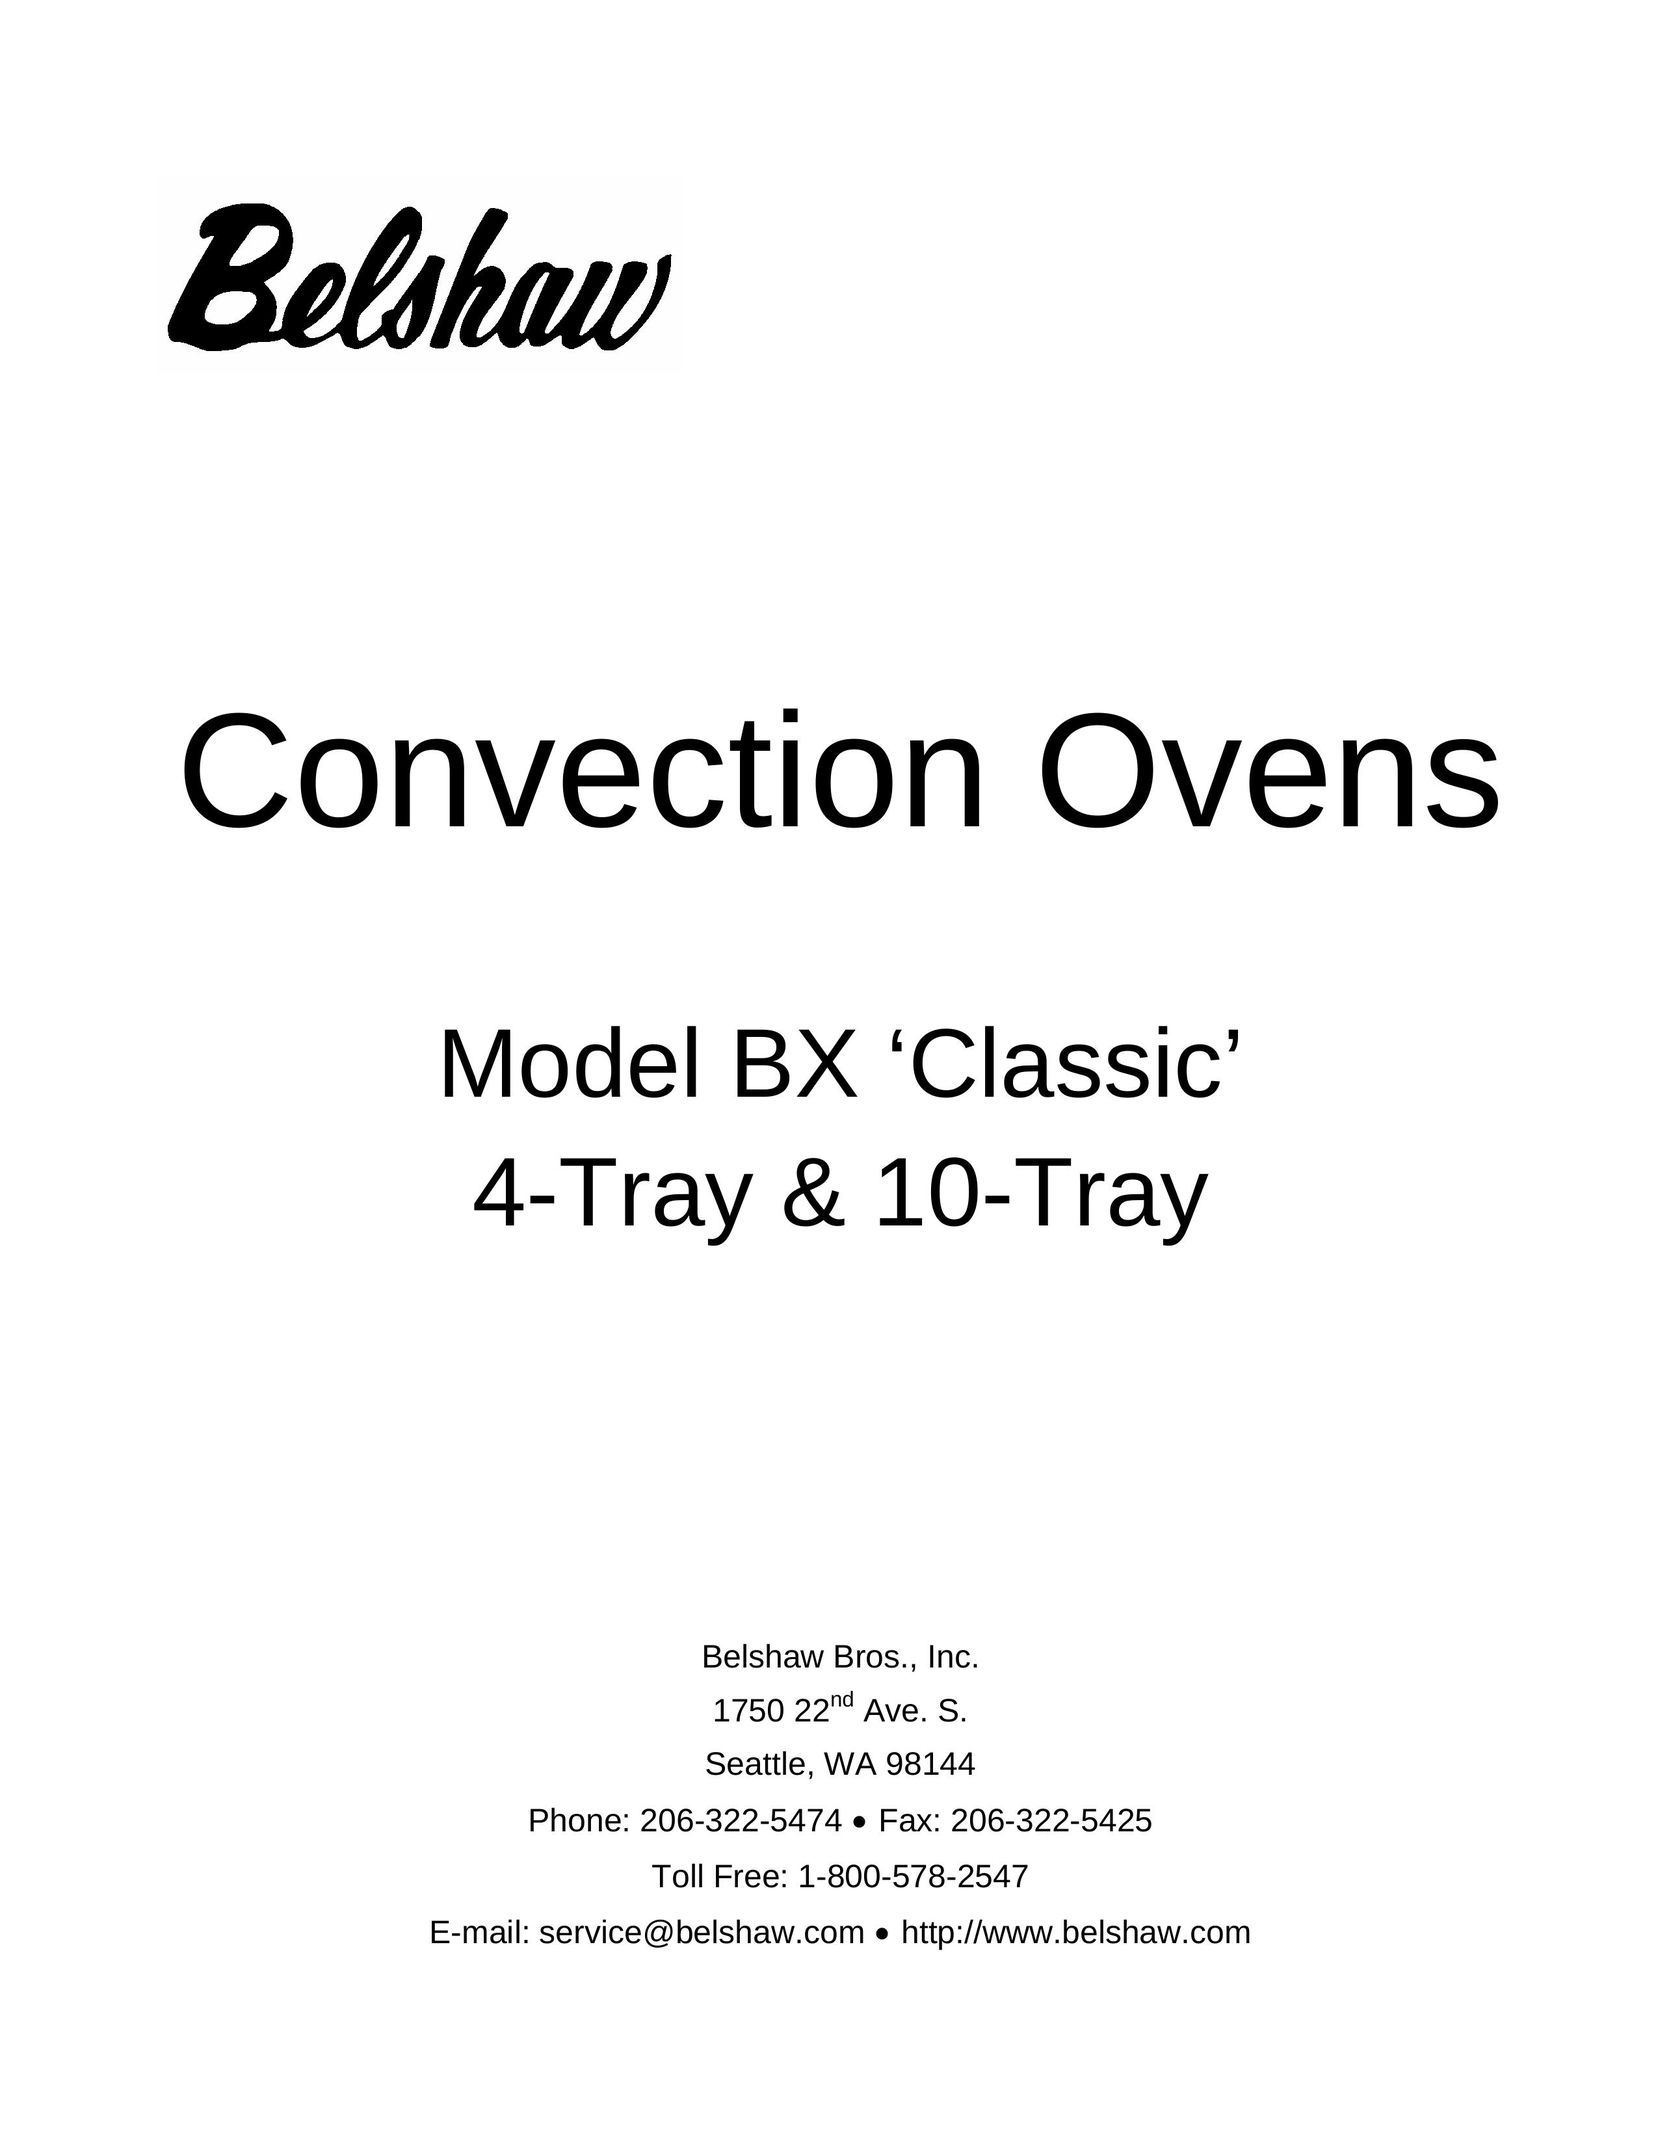 Belshaw Brothers 10-Tray Convection Oven User Manual